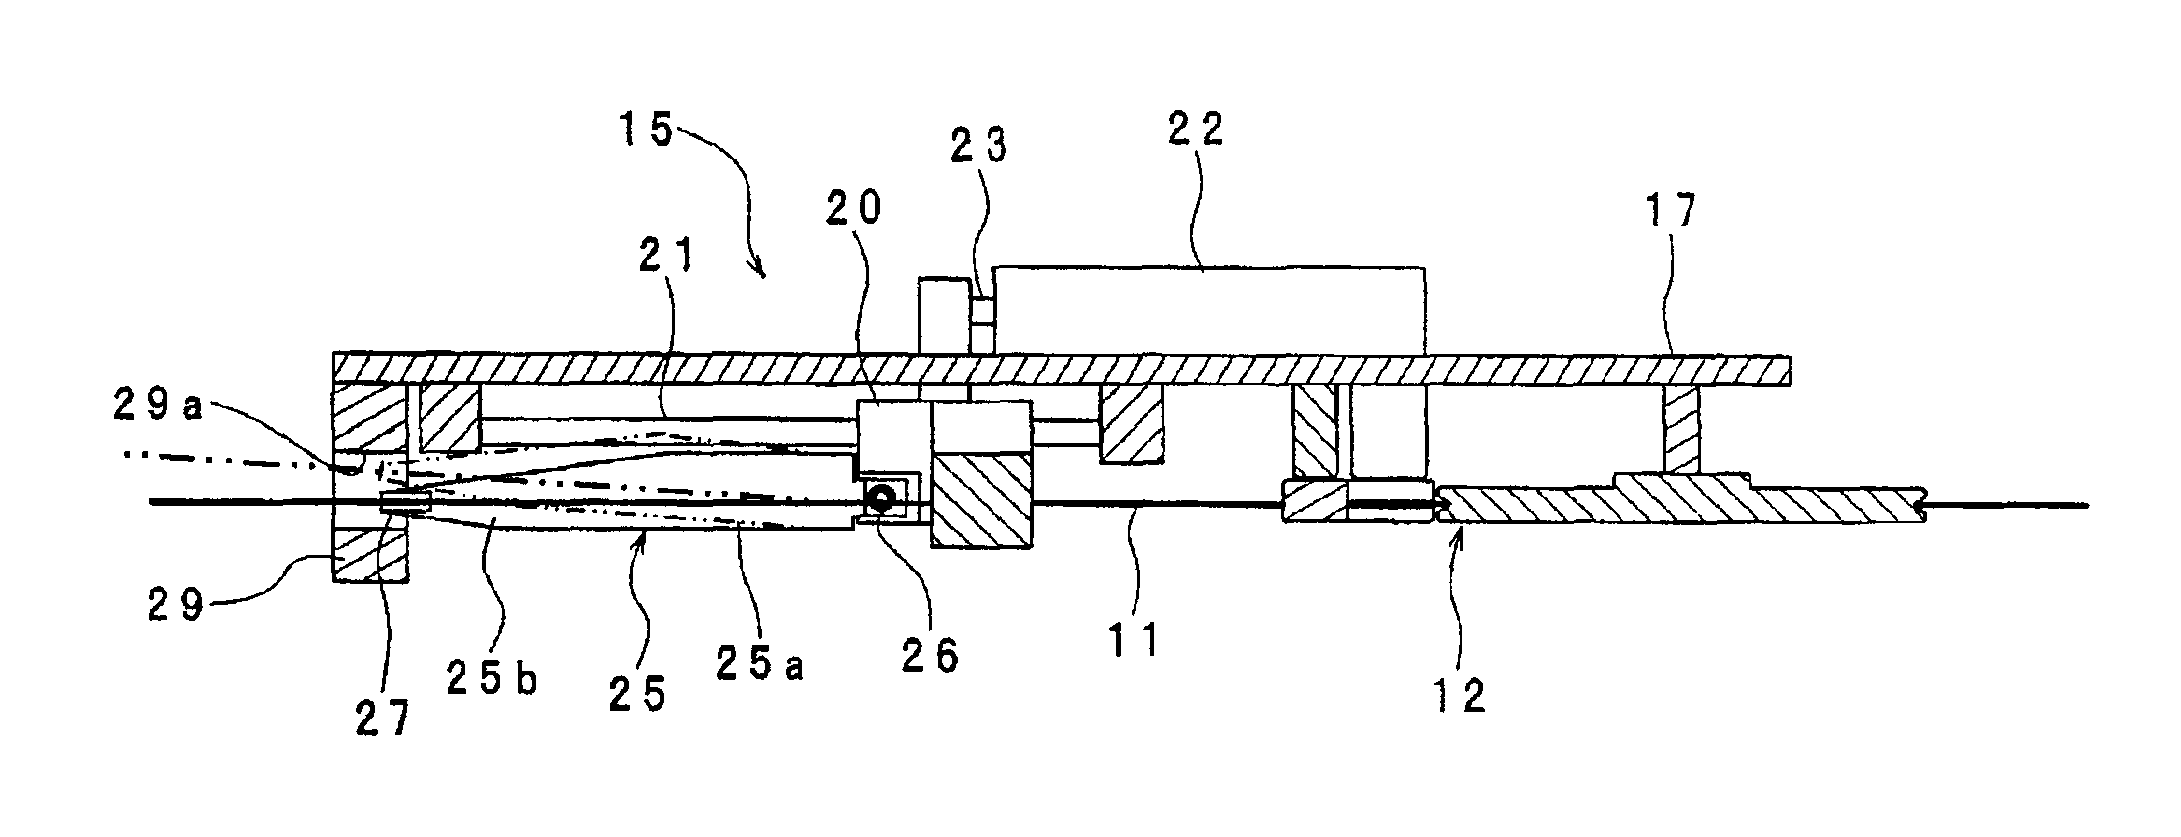 Bead wire winding and forming device